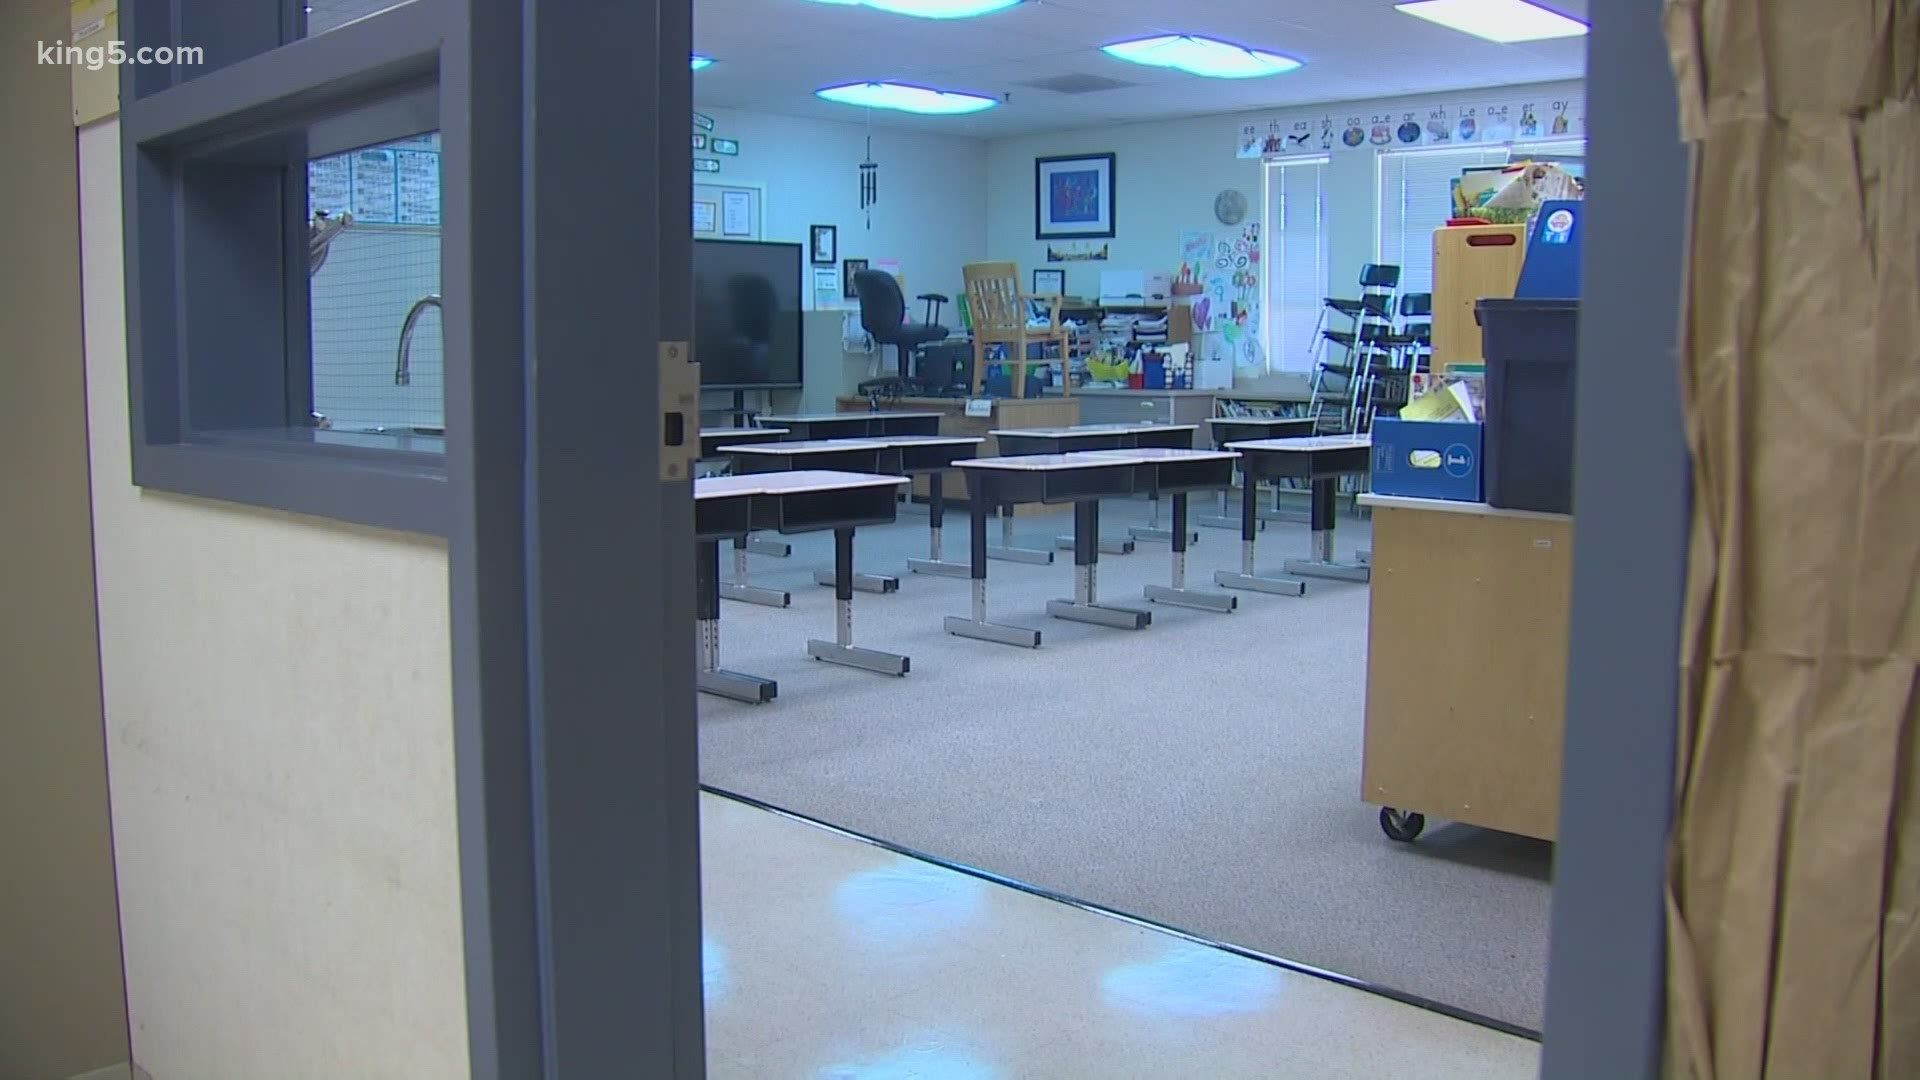 Kindergarteners will be able to move to in-person learning in 35 elementary schools in Tacoma as part of the district's plan to gradually bring students back.